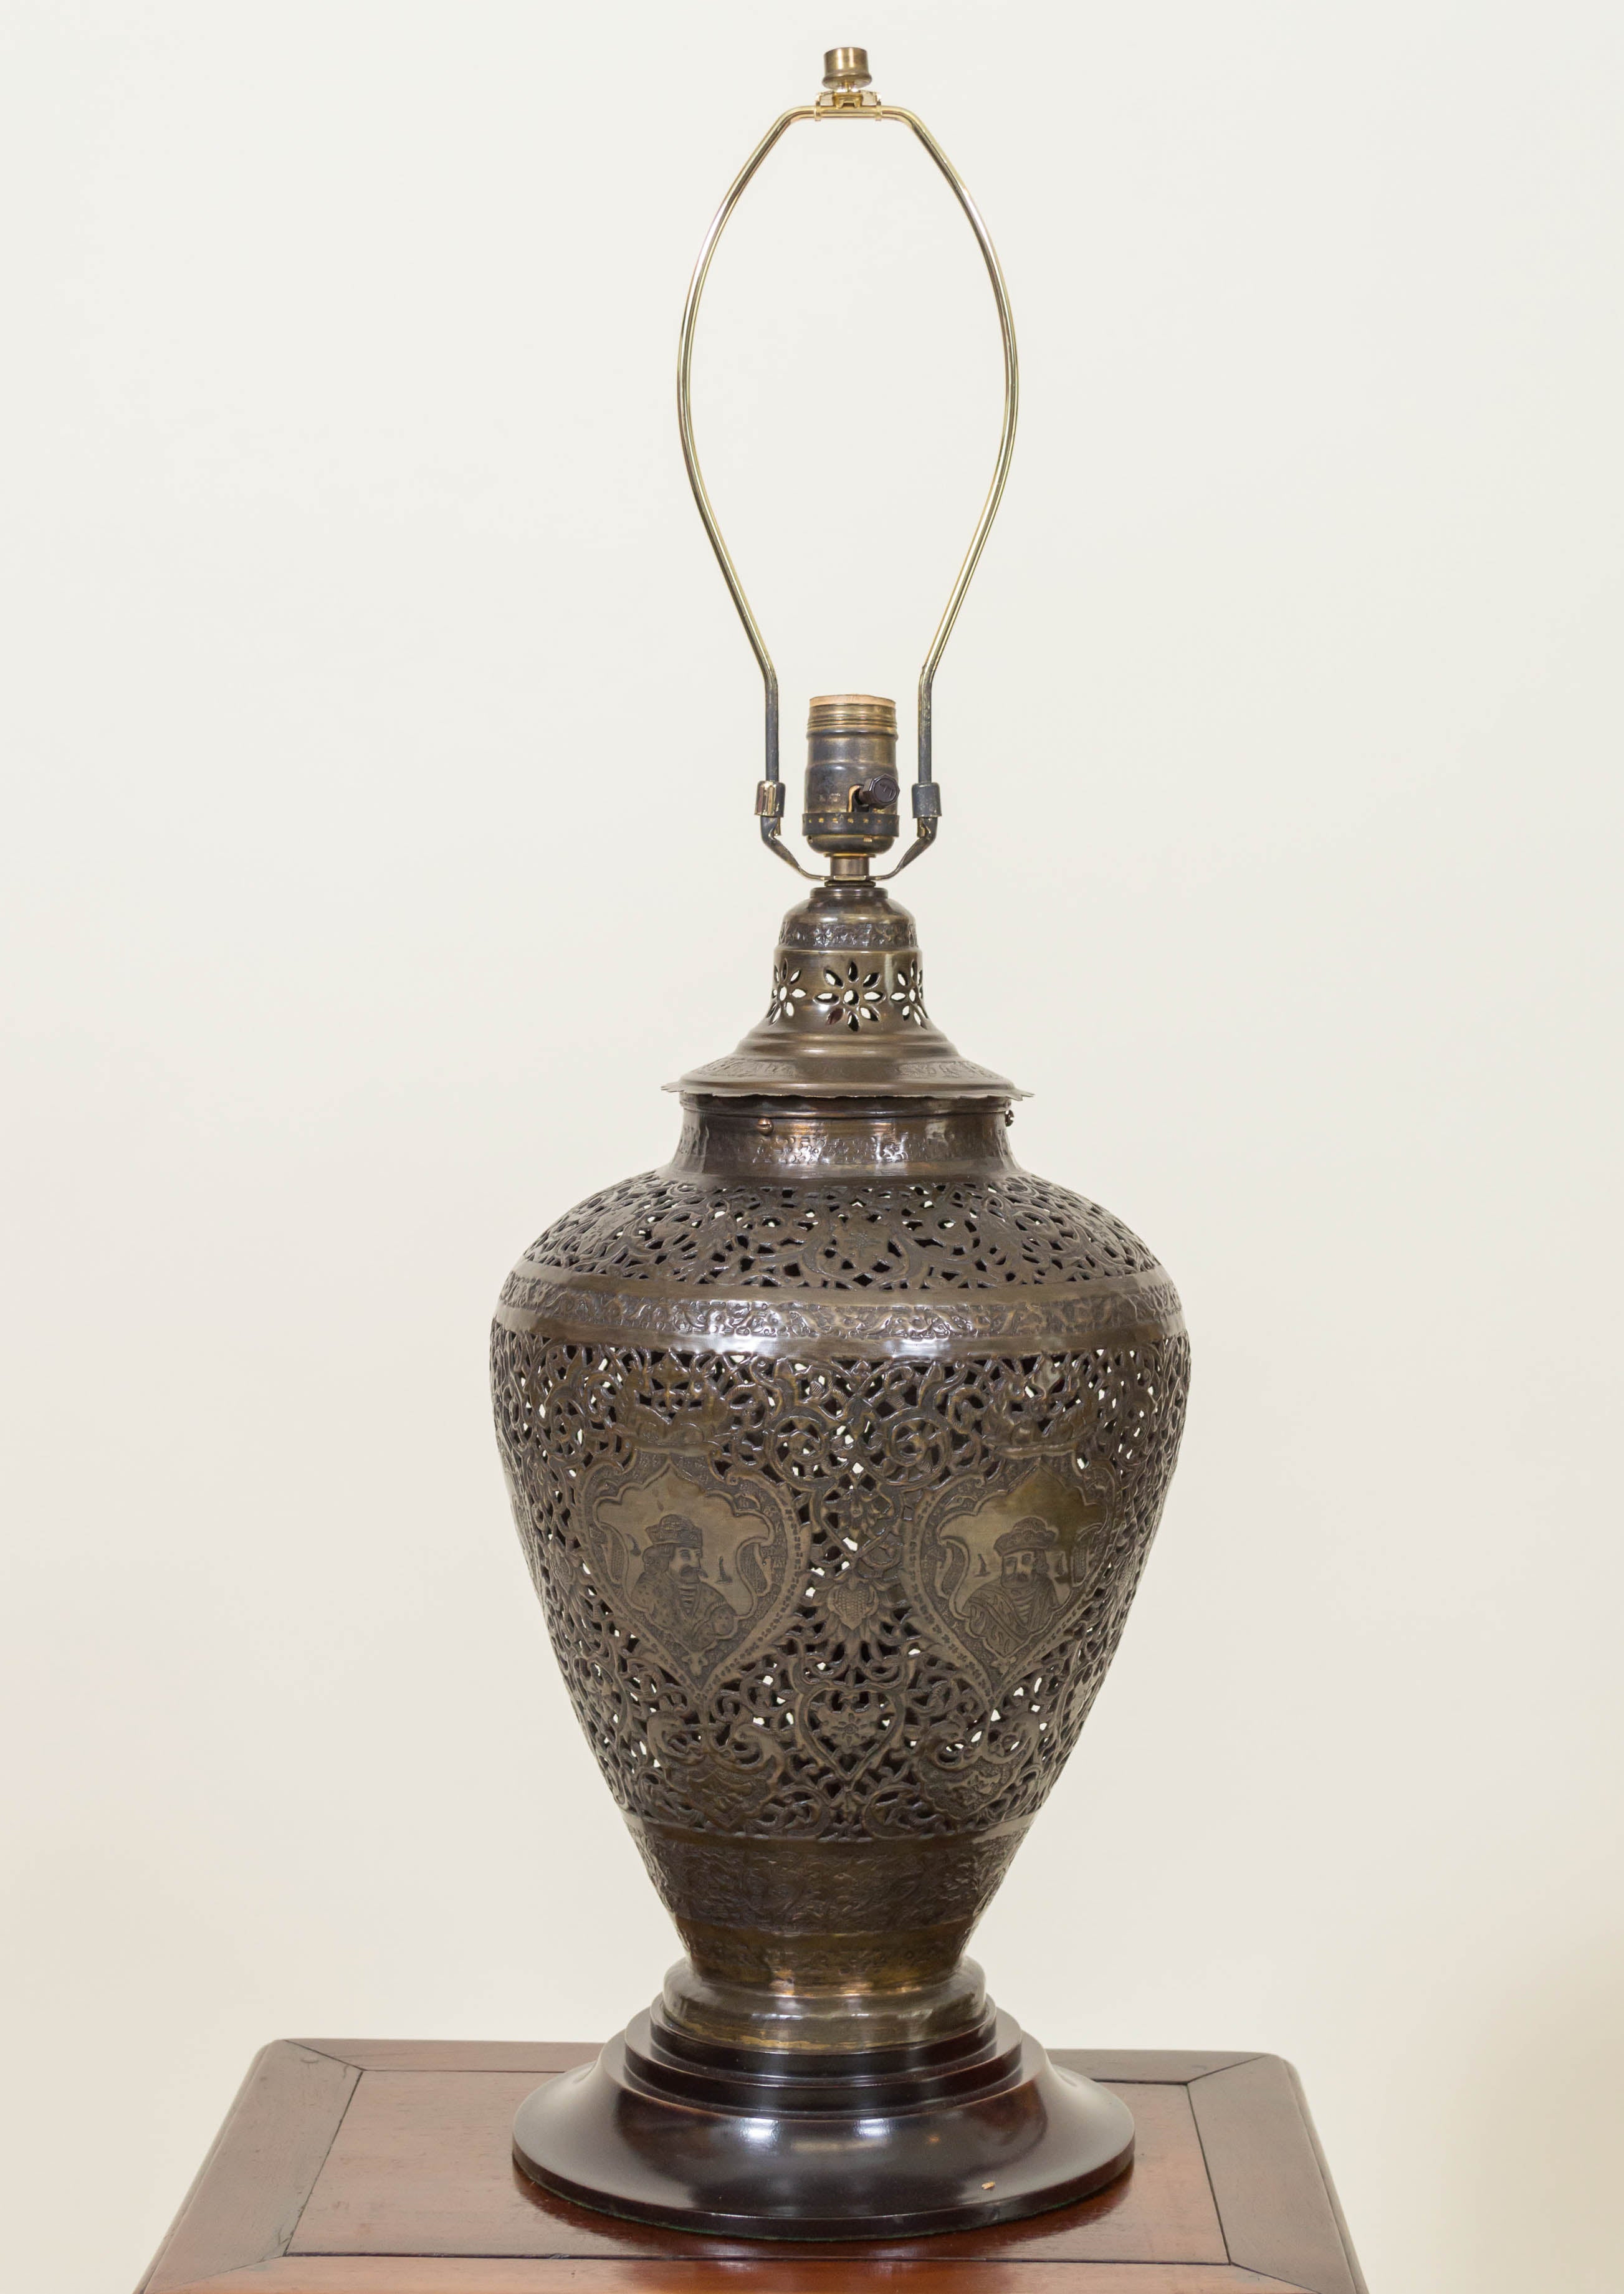 Exotic Persian Brass Reticulated and Engraved Custom Lamp, circa 1910-1920